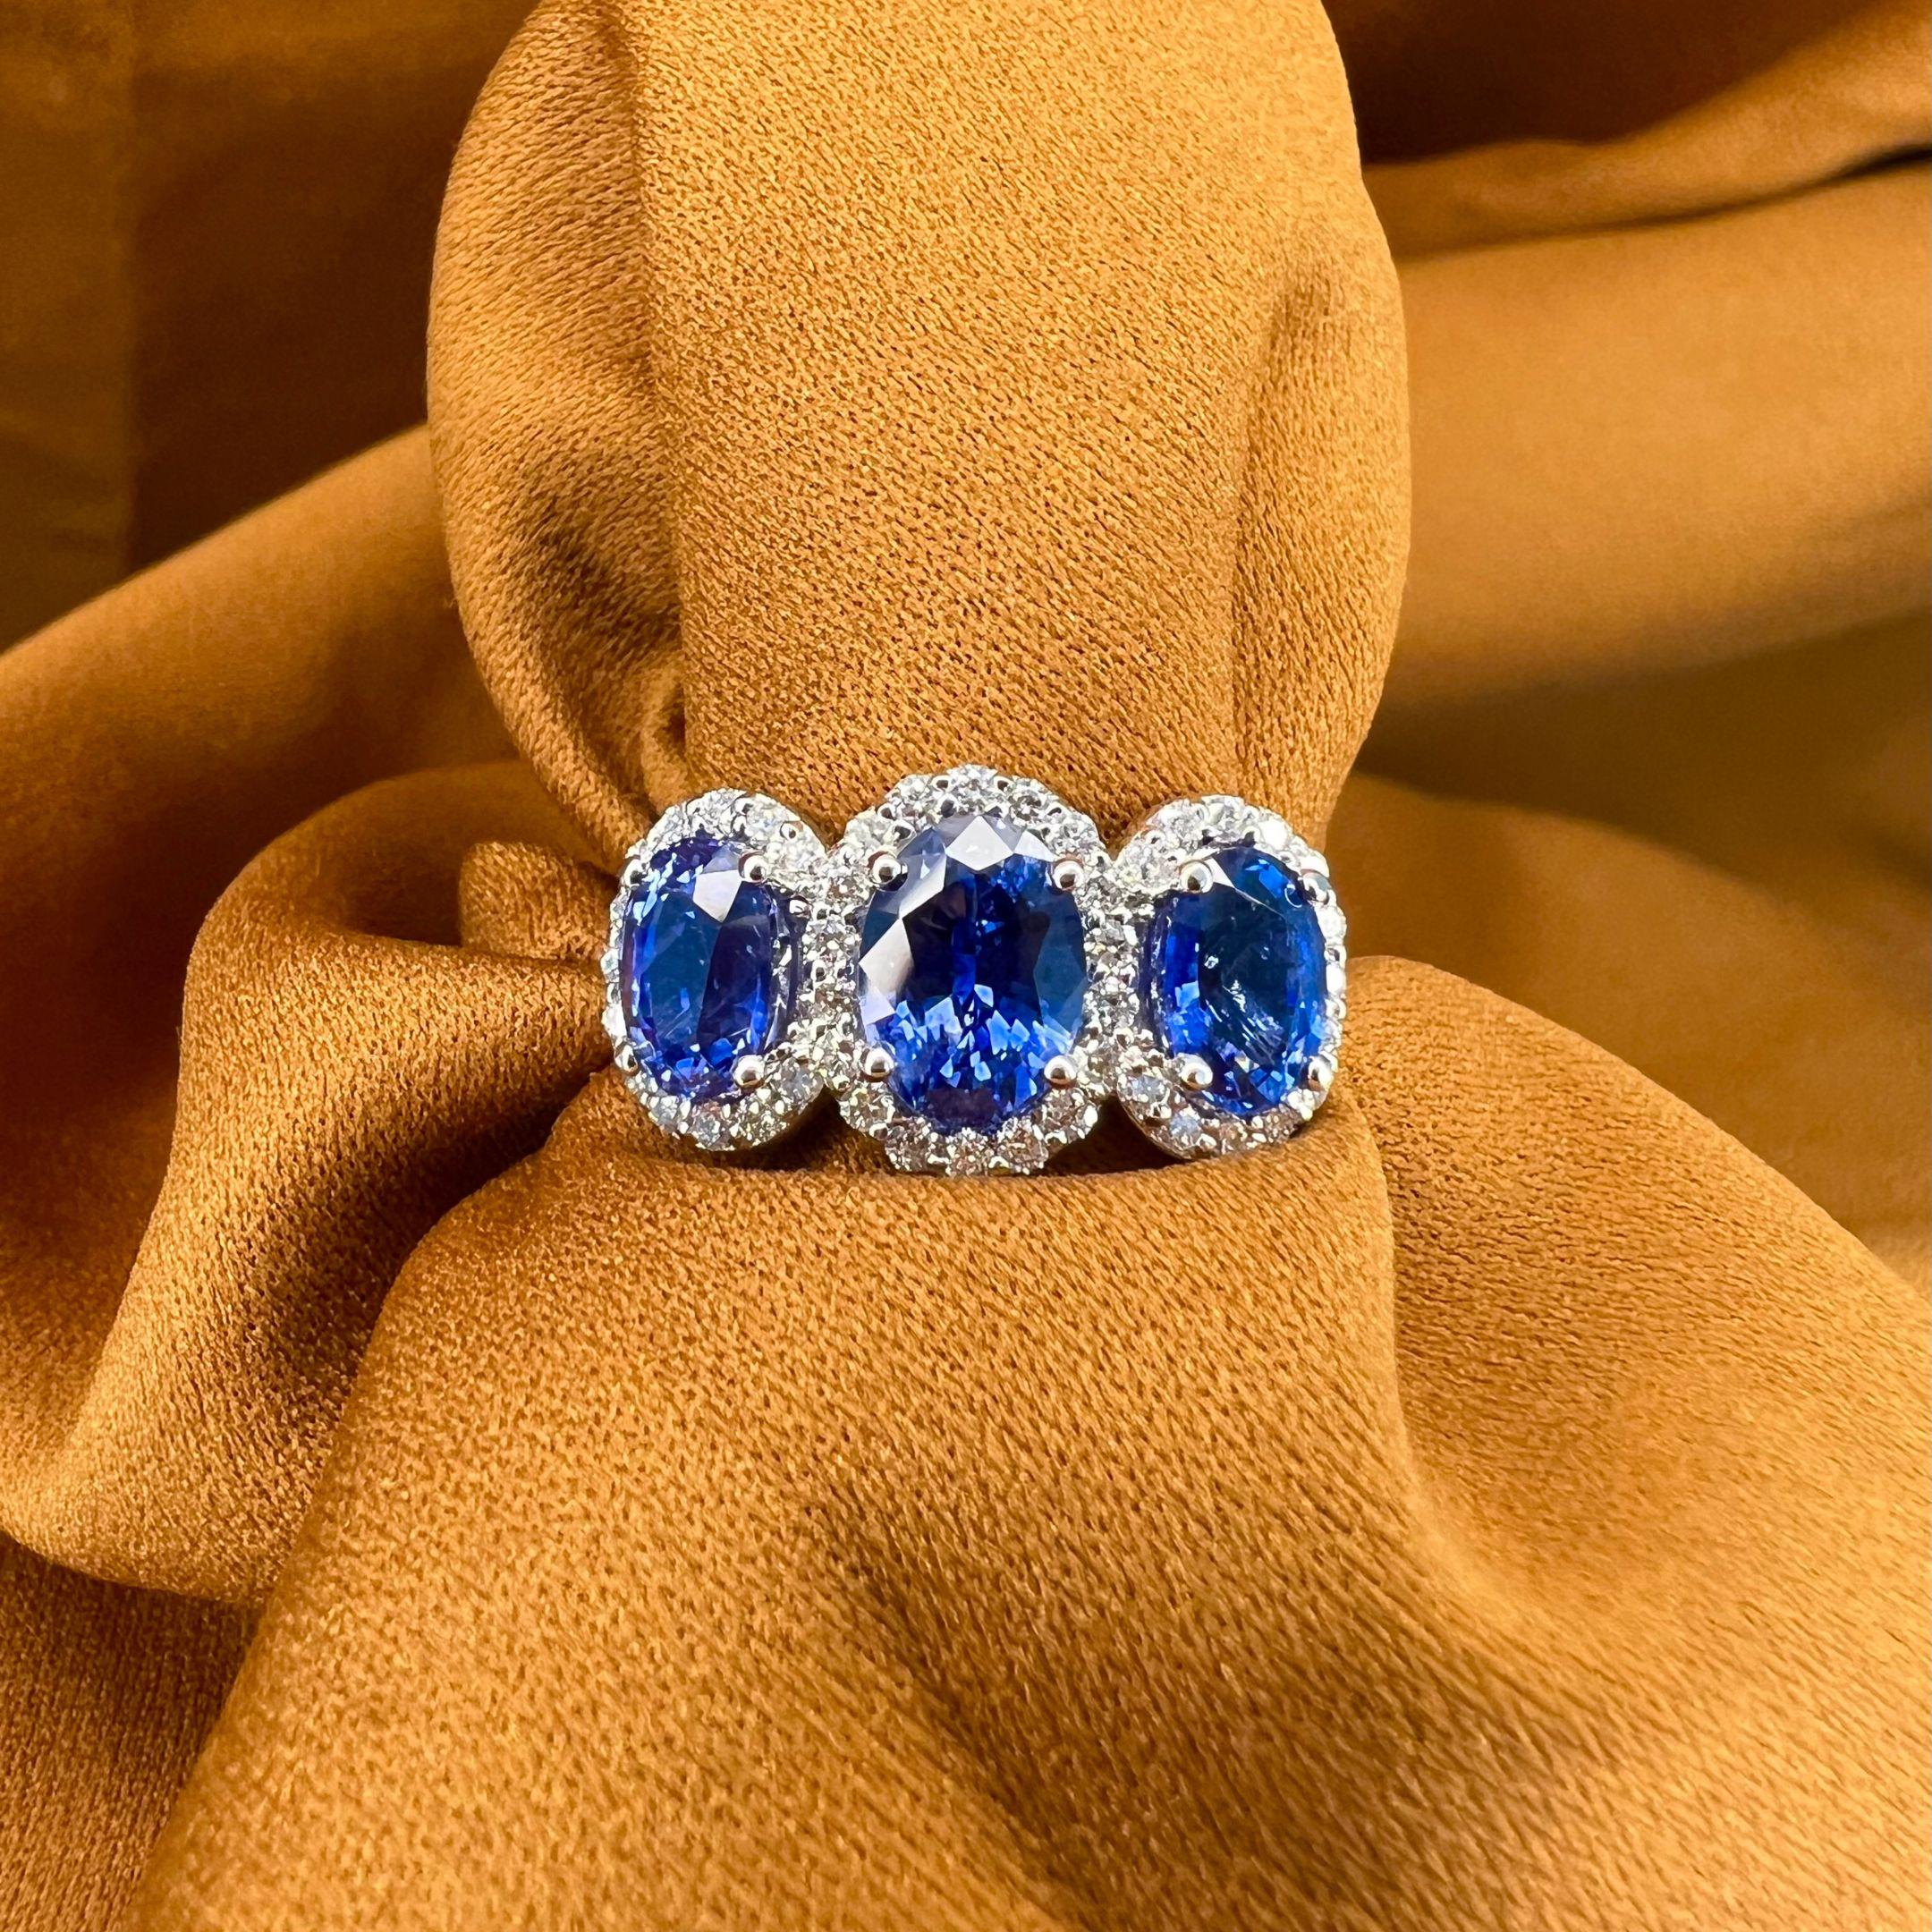 Sapphire Weight: 4.21 CTs
Measurements: 8x6/7x5 mm
Diamond Weight: 0.48 CTs
Metal: 18K White Gold 
Gold Weight: 5.46 gm
Ring Size: 7
Shape: Oval
Color: Blue
Hardness: 9
Birthstone: September
Product ID: MUR25317/Line 8